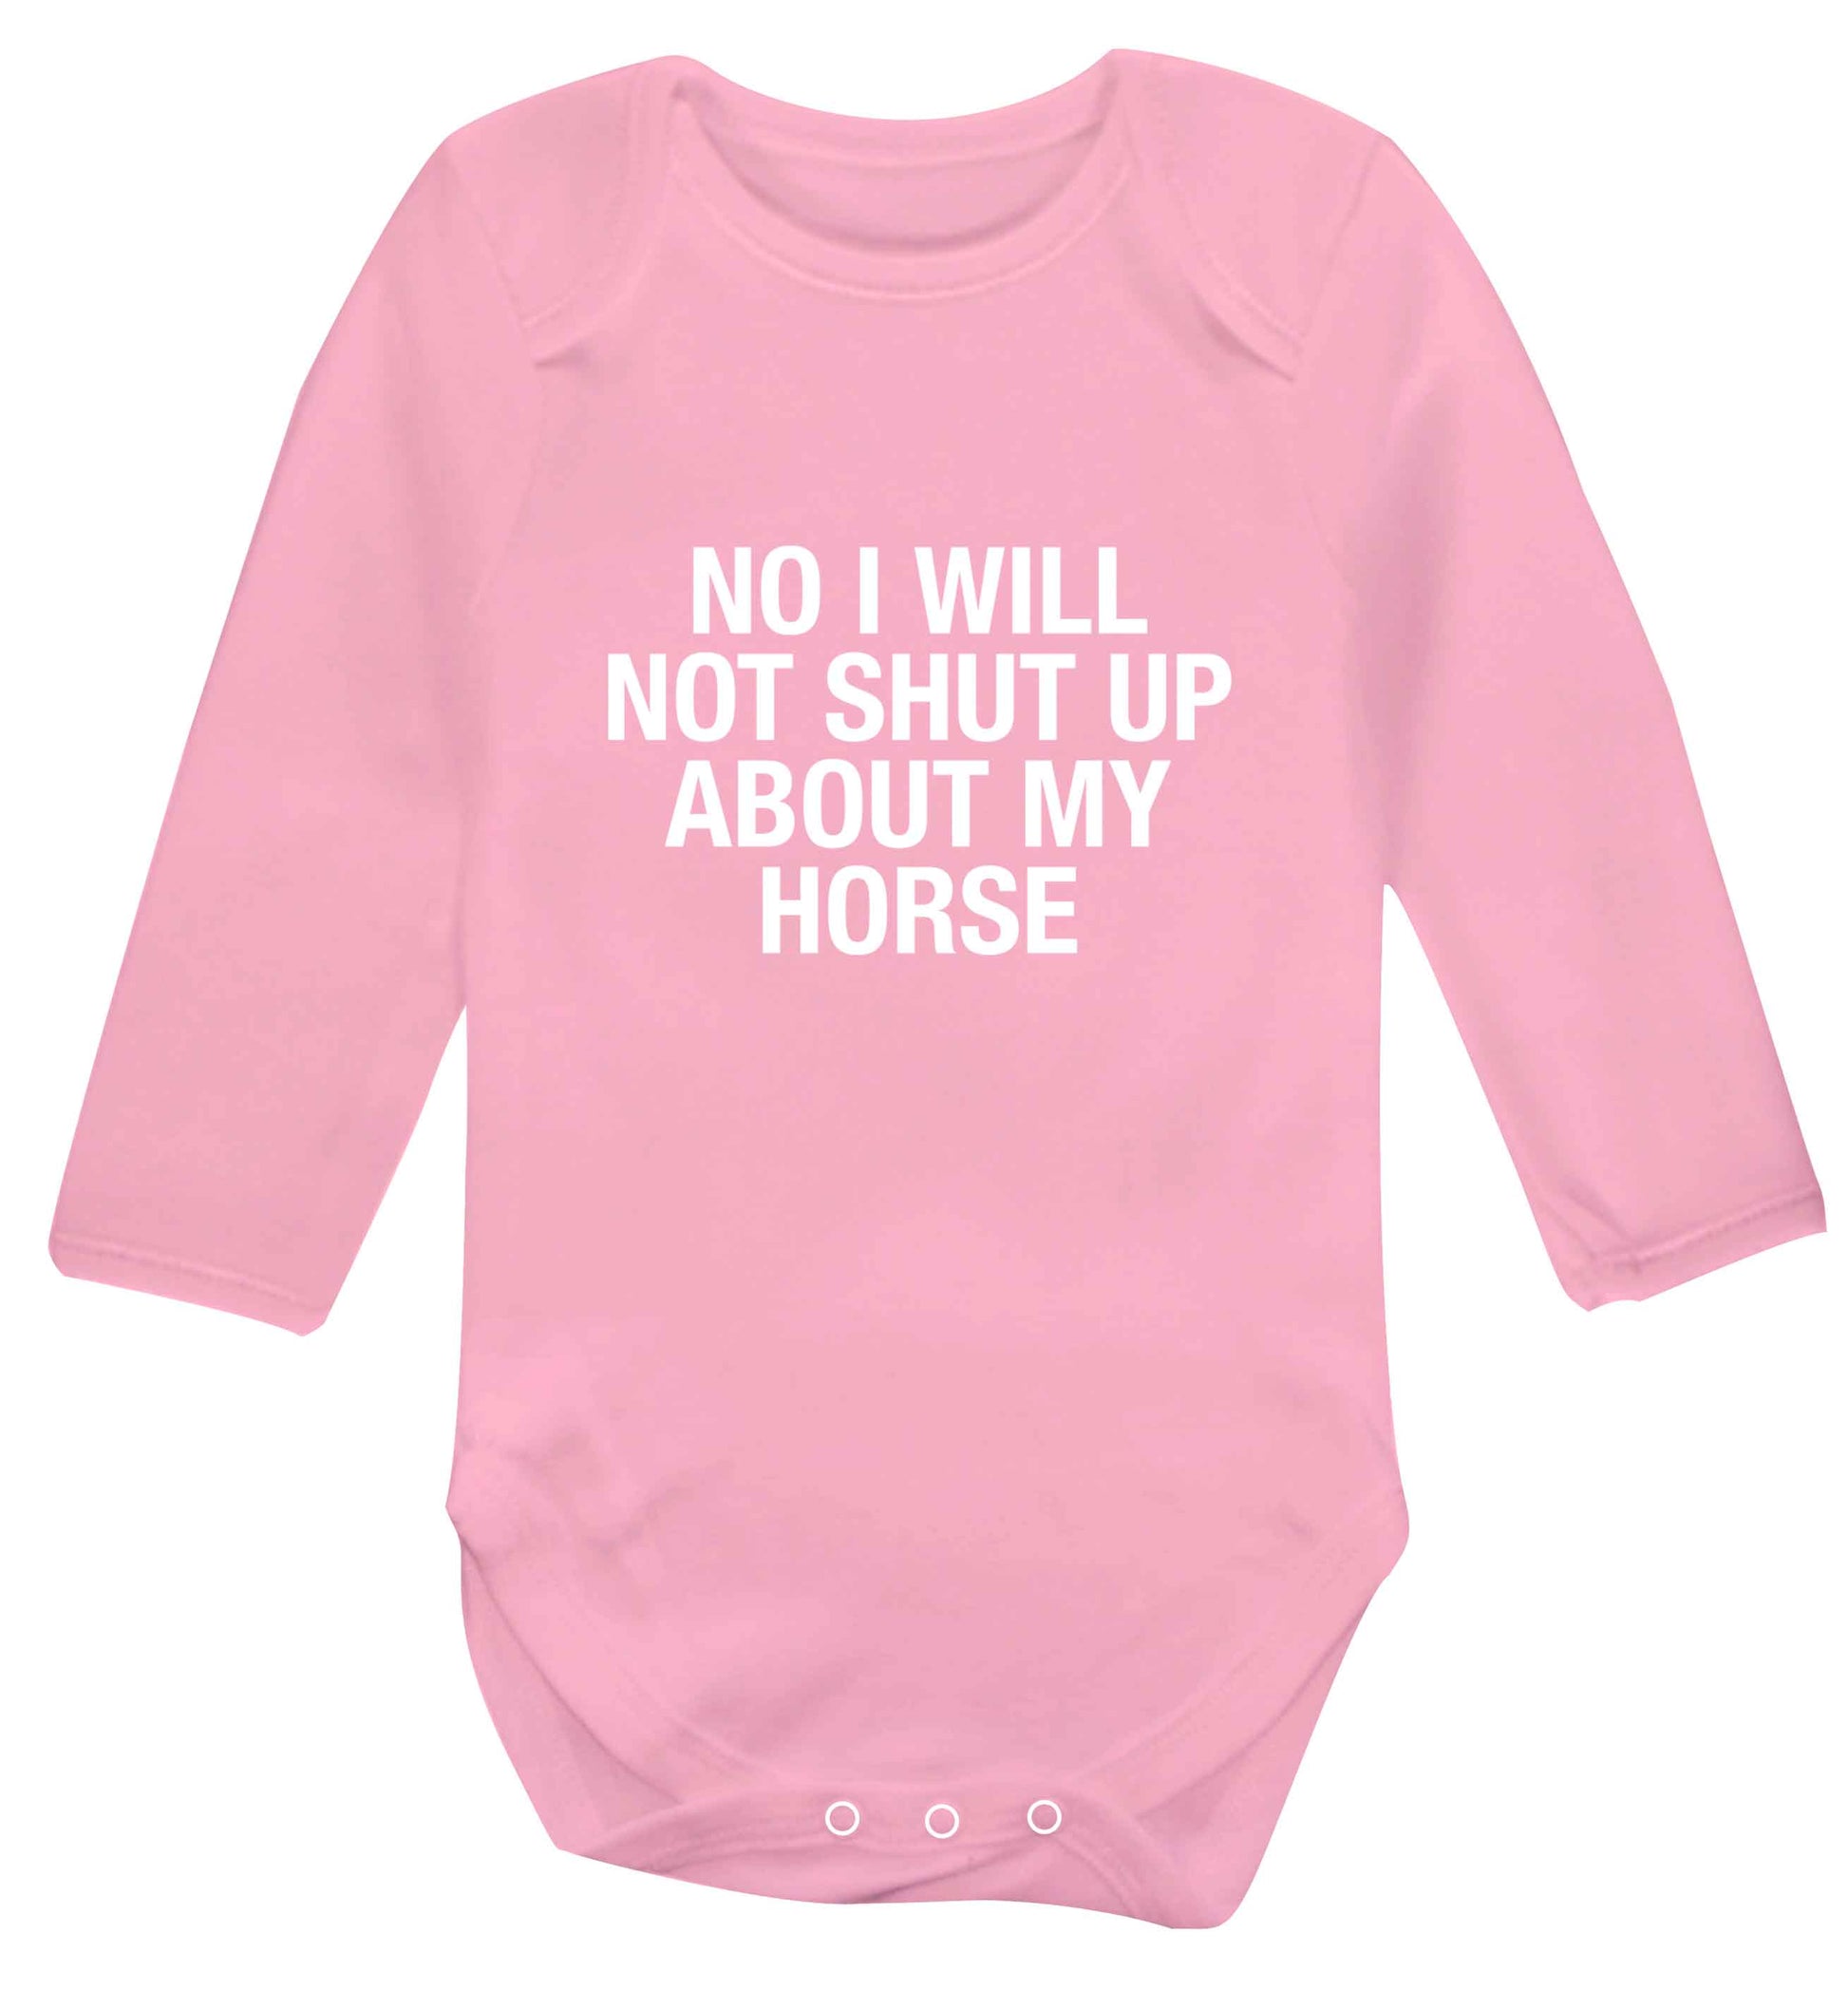 Warning may start talking about horses baby vest long sleeved pale pink 6-12 months